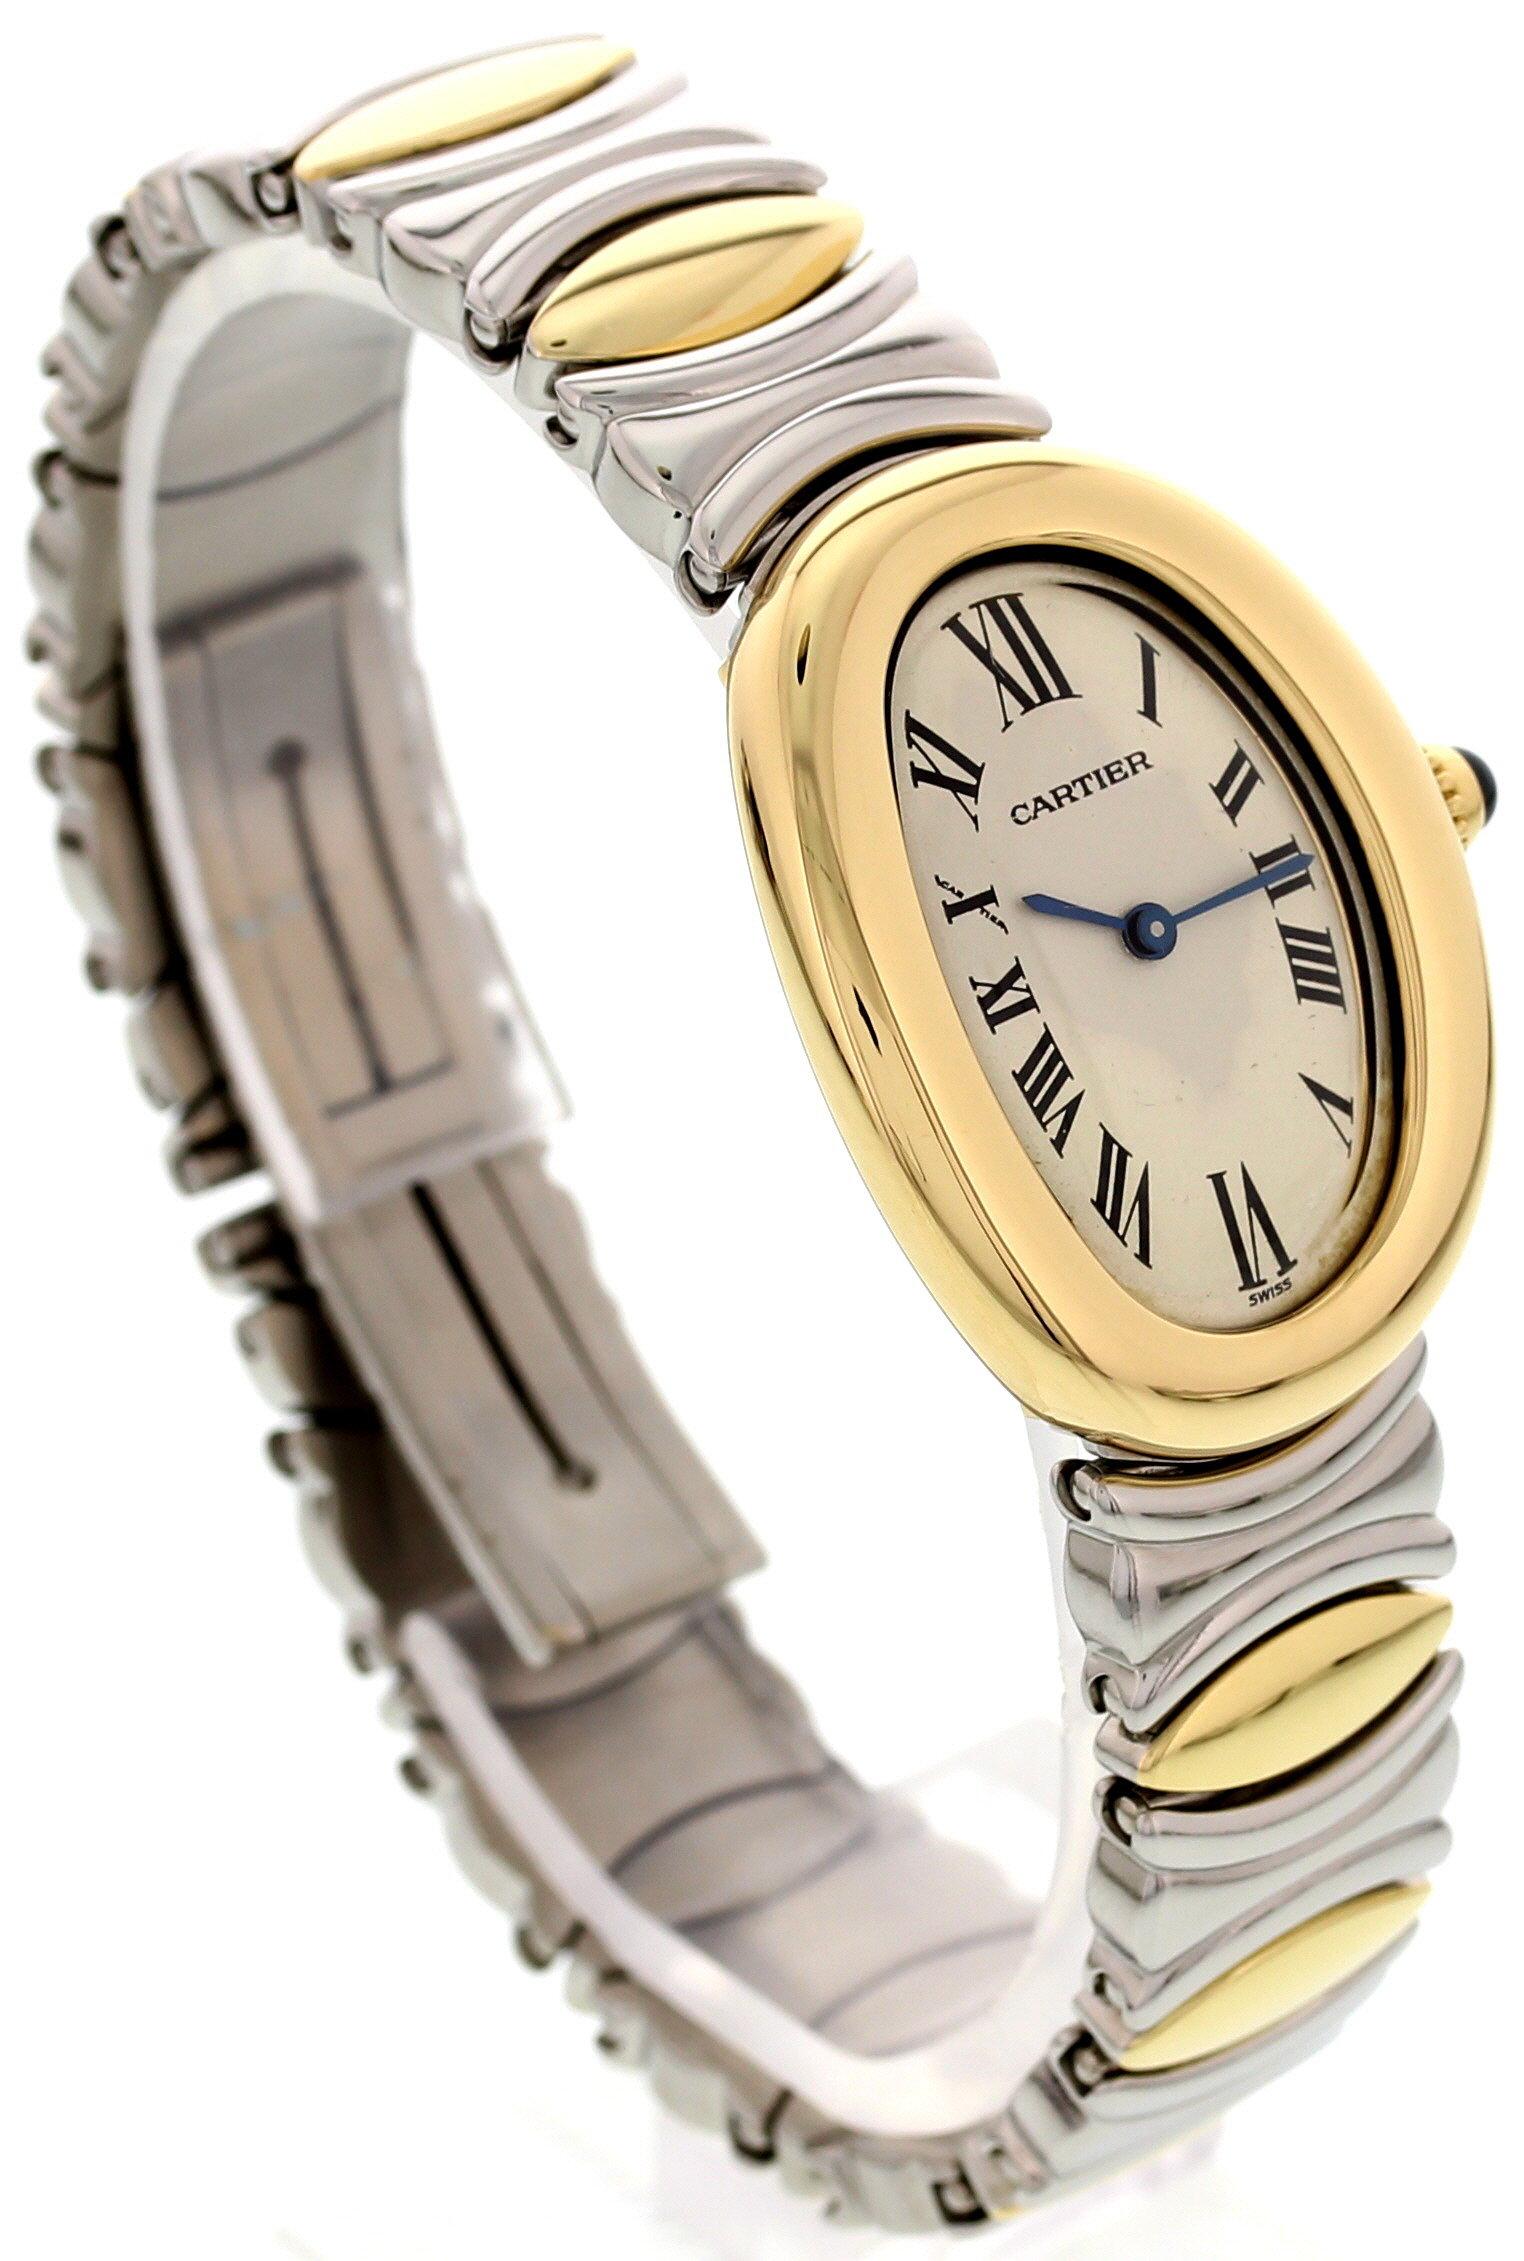 Ladies Cartier Baignoire. 22 mm 18k yellow gold case. 18k yellow gold bezel. White dial with blue hands and black Roman numerals. 18k yellow gold and stainless steel bracelet with hidden double folding clasp; will fit up to a 7 inch wrist. Quartz